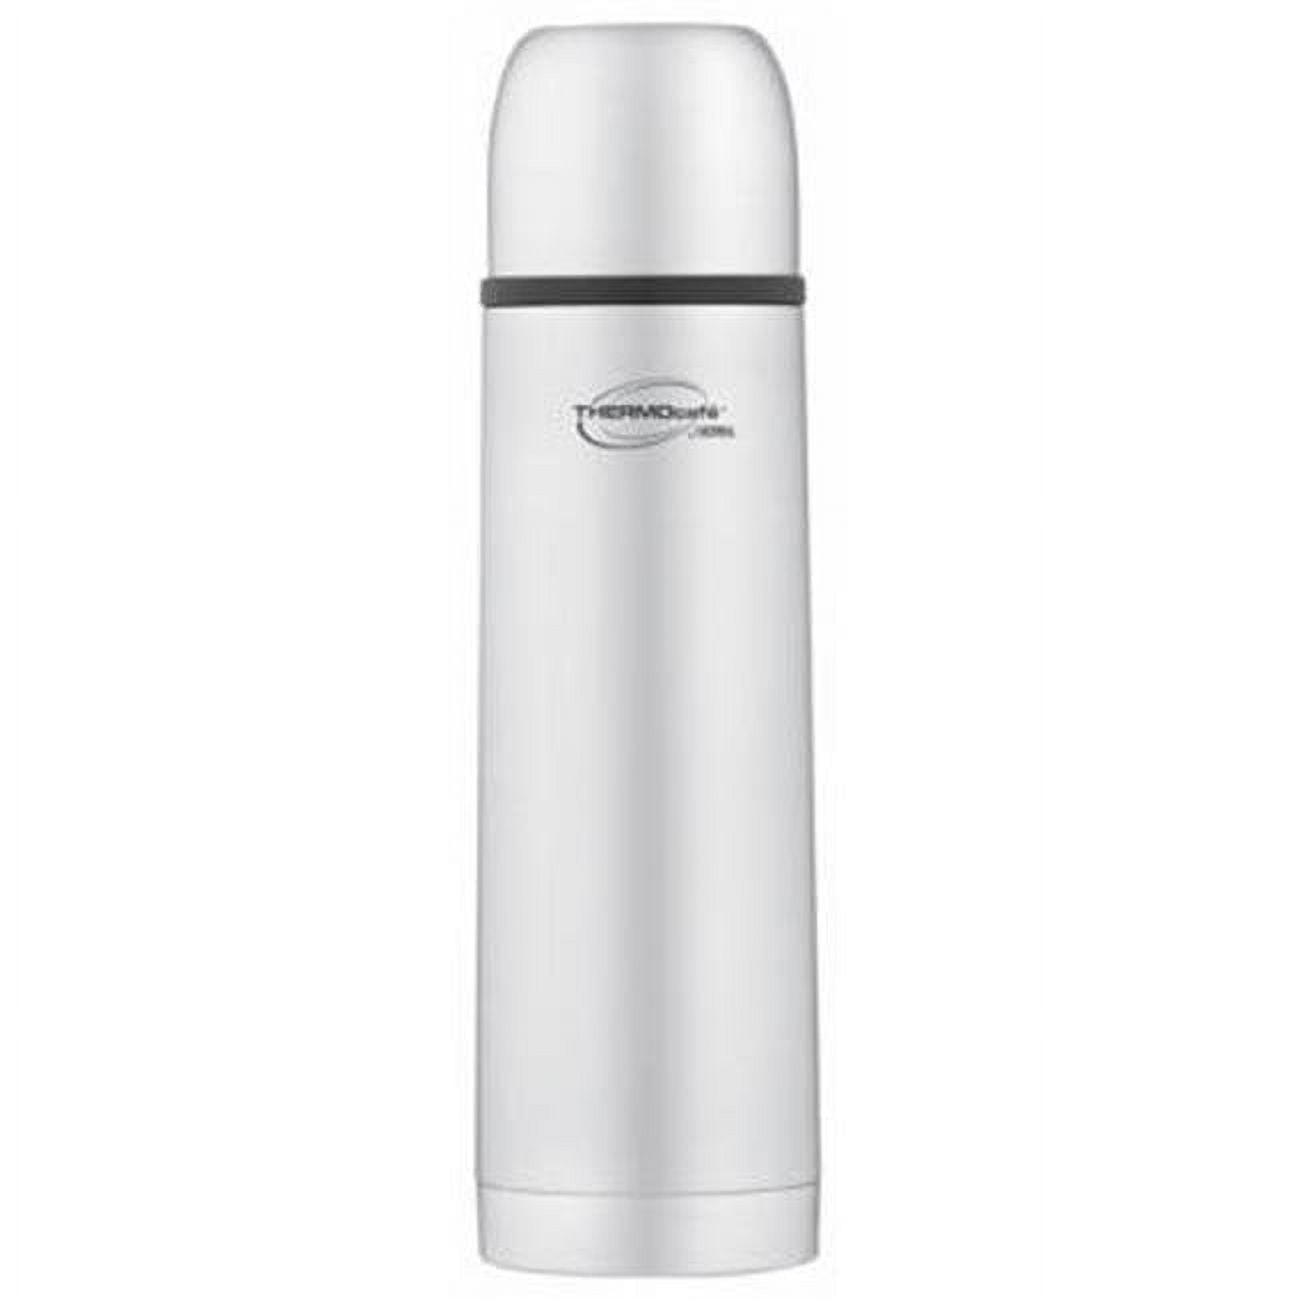 Thermo Cafe THERMOCAFE S/S 171710 Travel Mug, 1 Count (Pack of 1),  Stainless Steel